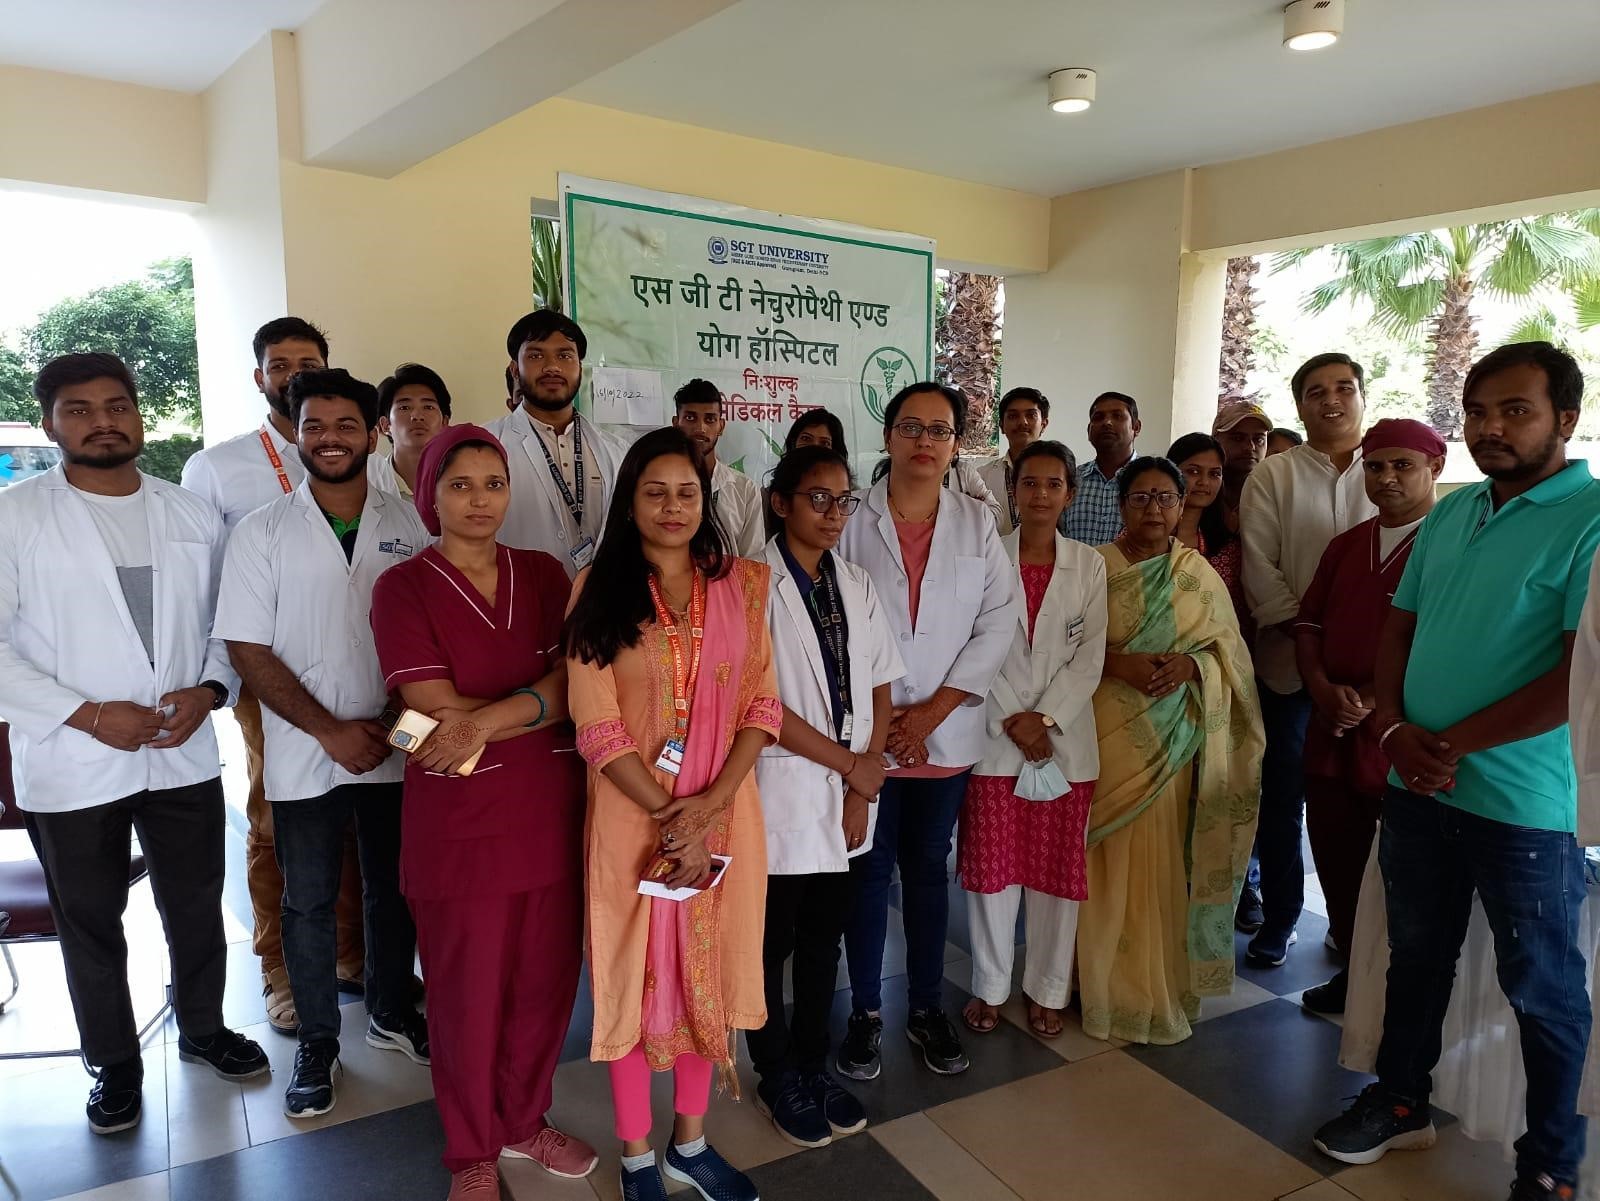 You are currently viewing SGT Naturopathy and Yoga Hospital organized an awareness and free medical health check-up camp in The Heartsong Society, Sector 108, Gurugram